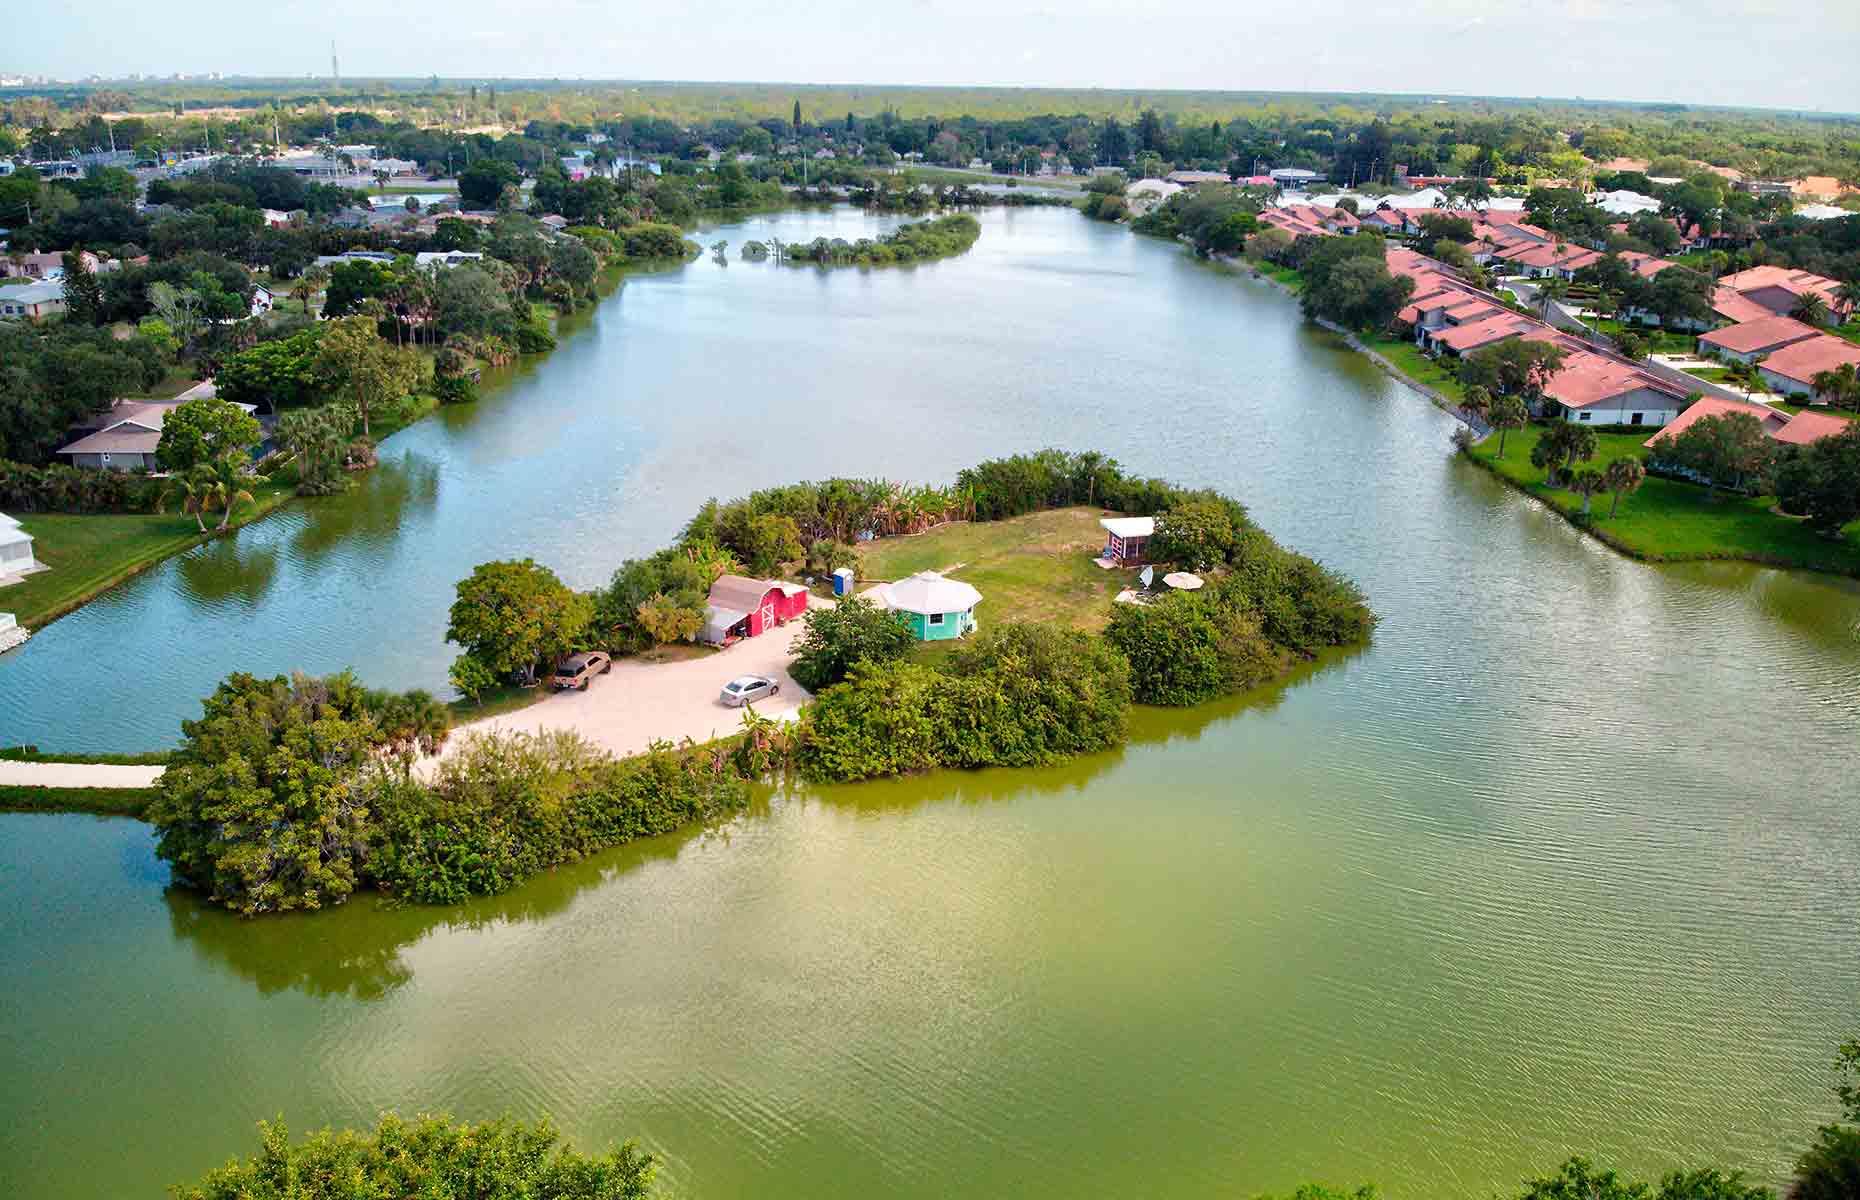 <p>Nestled in the middle of a 12-acre lake, only a few rundown storage buildings stood on the property, now known as Shellmate Island. But with its idyllic surroundings and bountiful fruit trees, the location, pictured here after the overhaul, was undoubtedly special. “It took a lot of work <span>–</span> it was rusty gold <span>–</span> so you take the rust off and you’ve got gold”, Tim explains. </p>